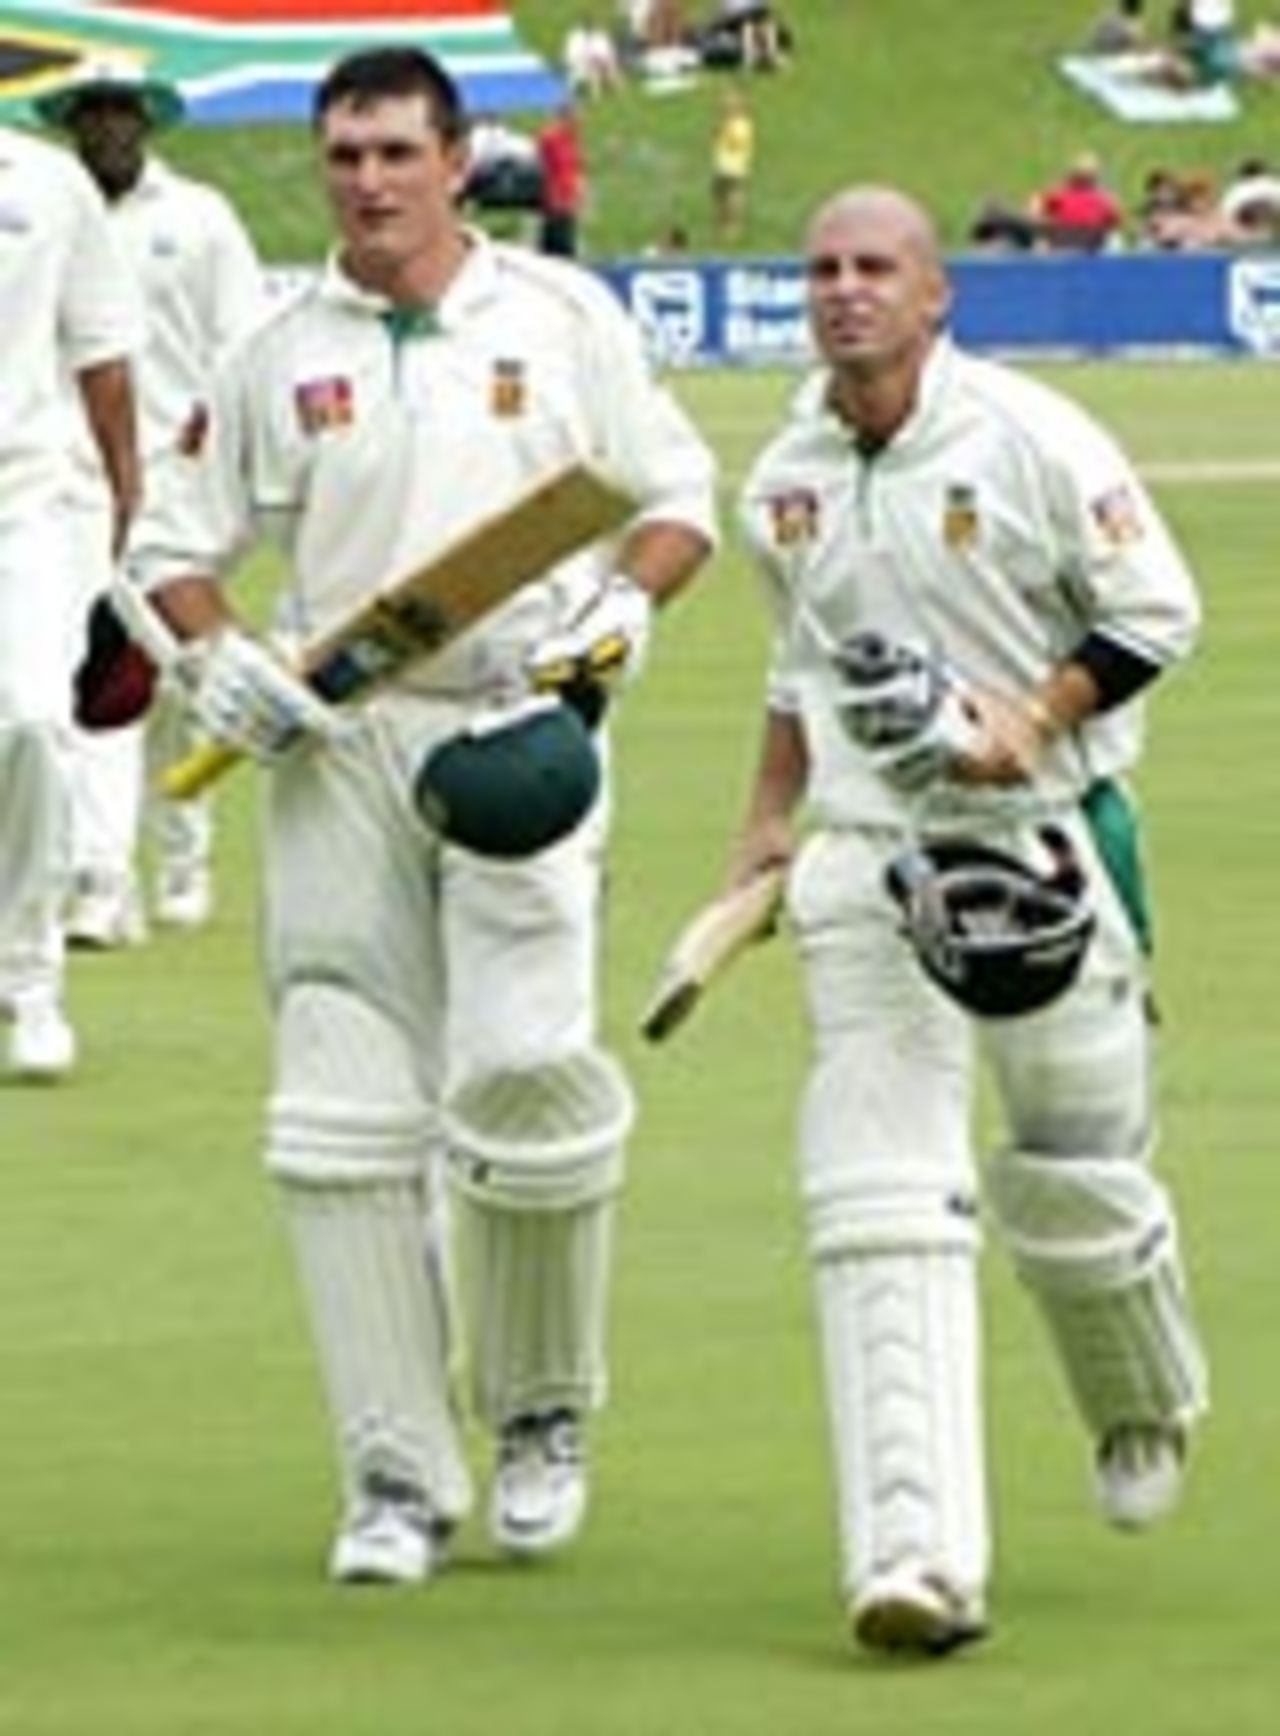 Graeme Smith and Herschelle Gibbs celebrate, South Africa v West Indies, 4th Test, Centurion, January 16, 2004